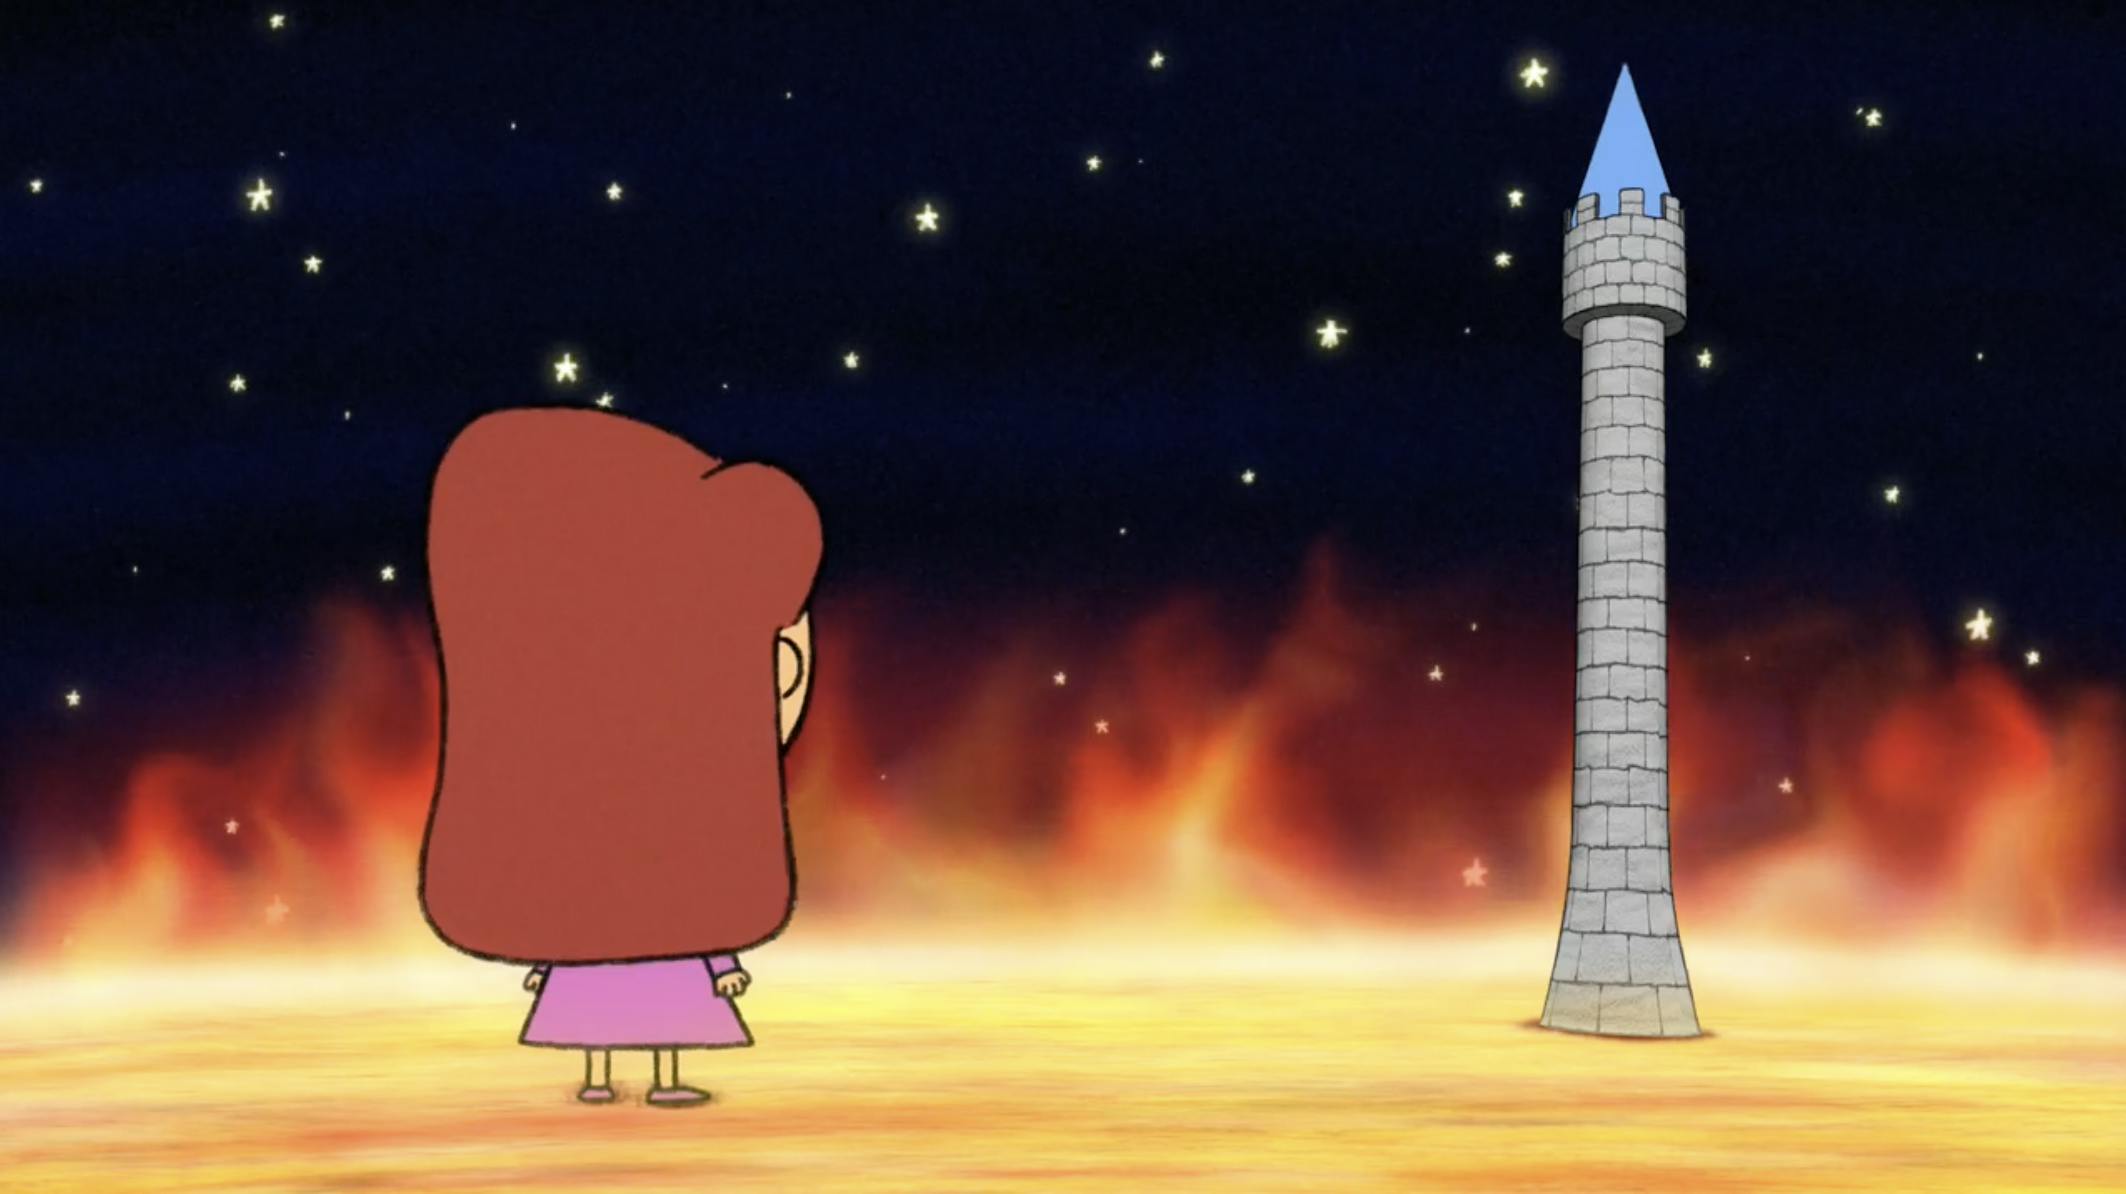 A young girl stands on the surface of the sun, staring at a tall castle.